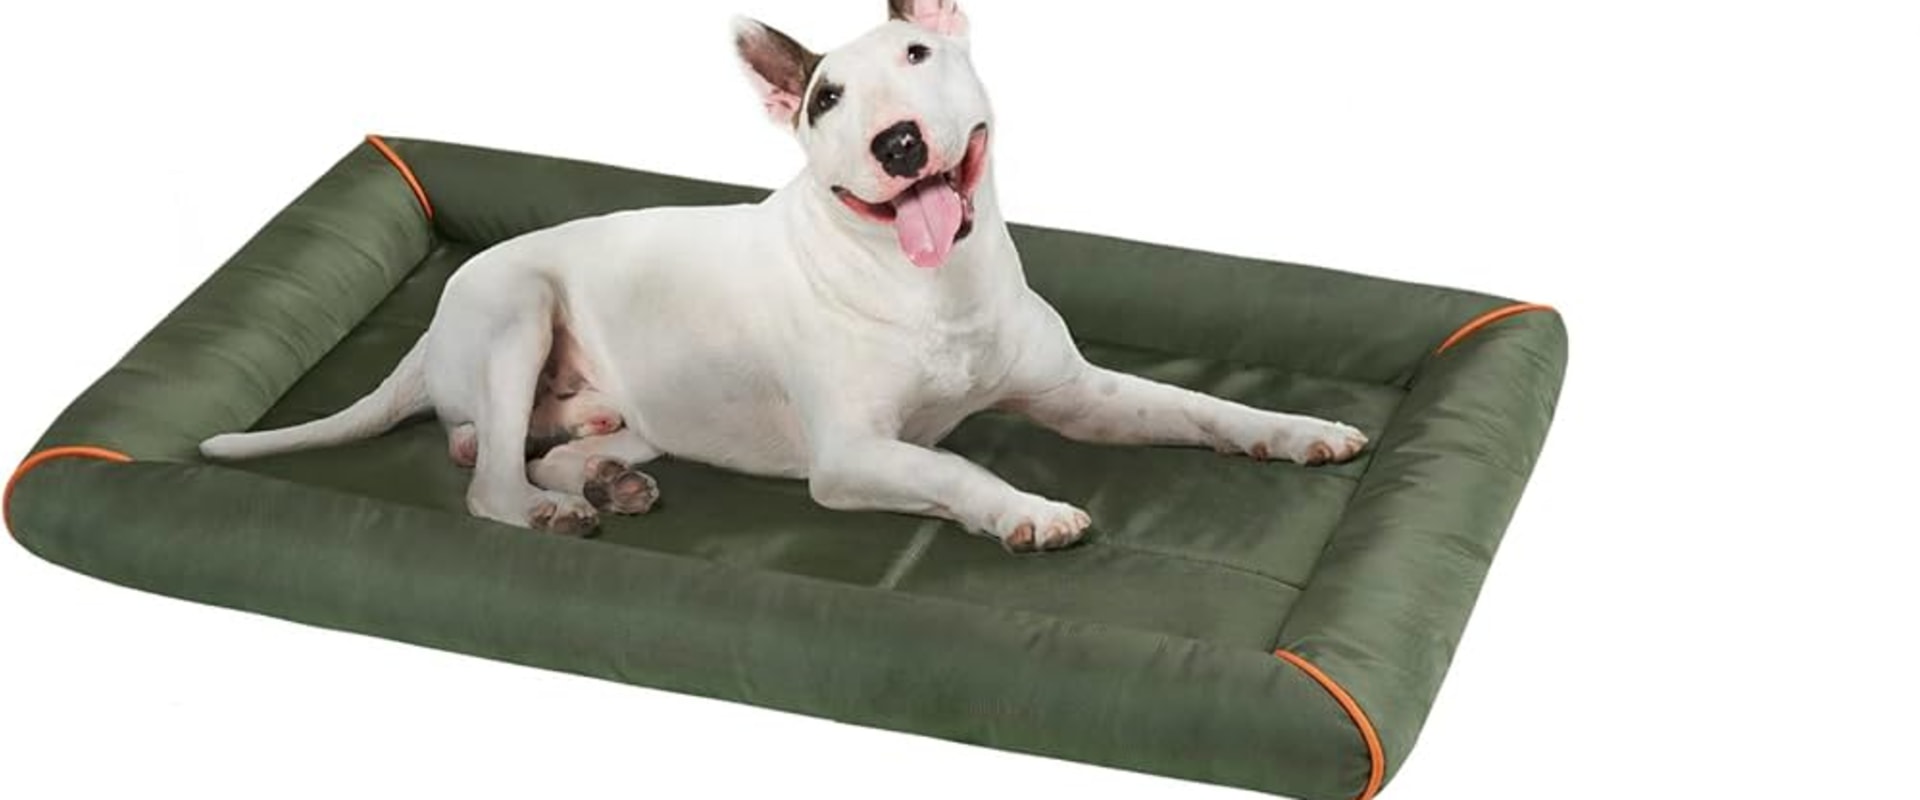 Travel-Friendly Dog Beds: A Must-Have for Your Furry Companion